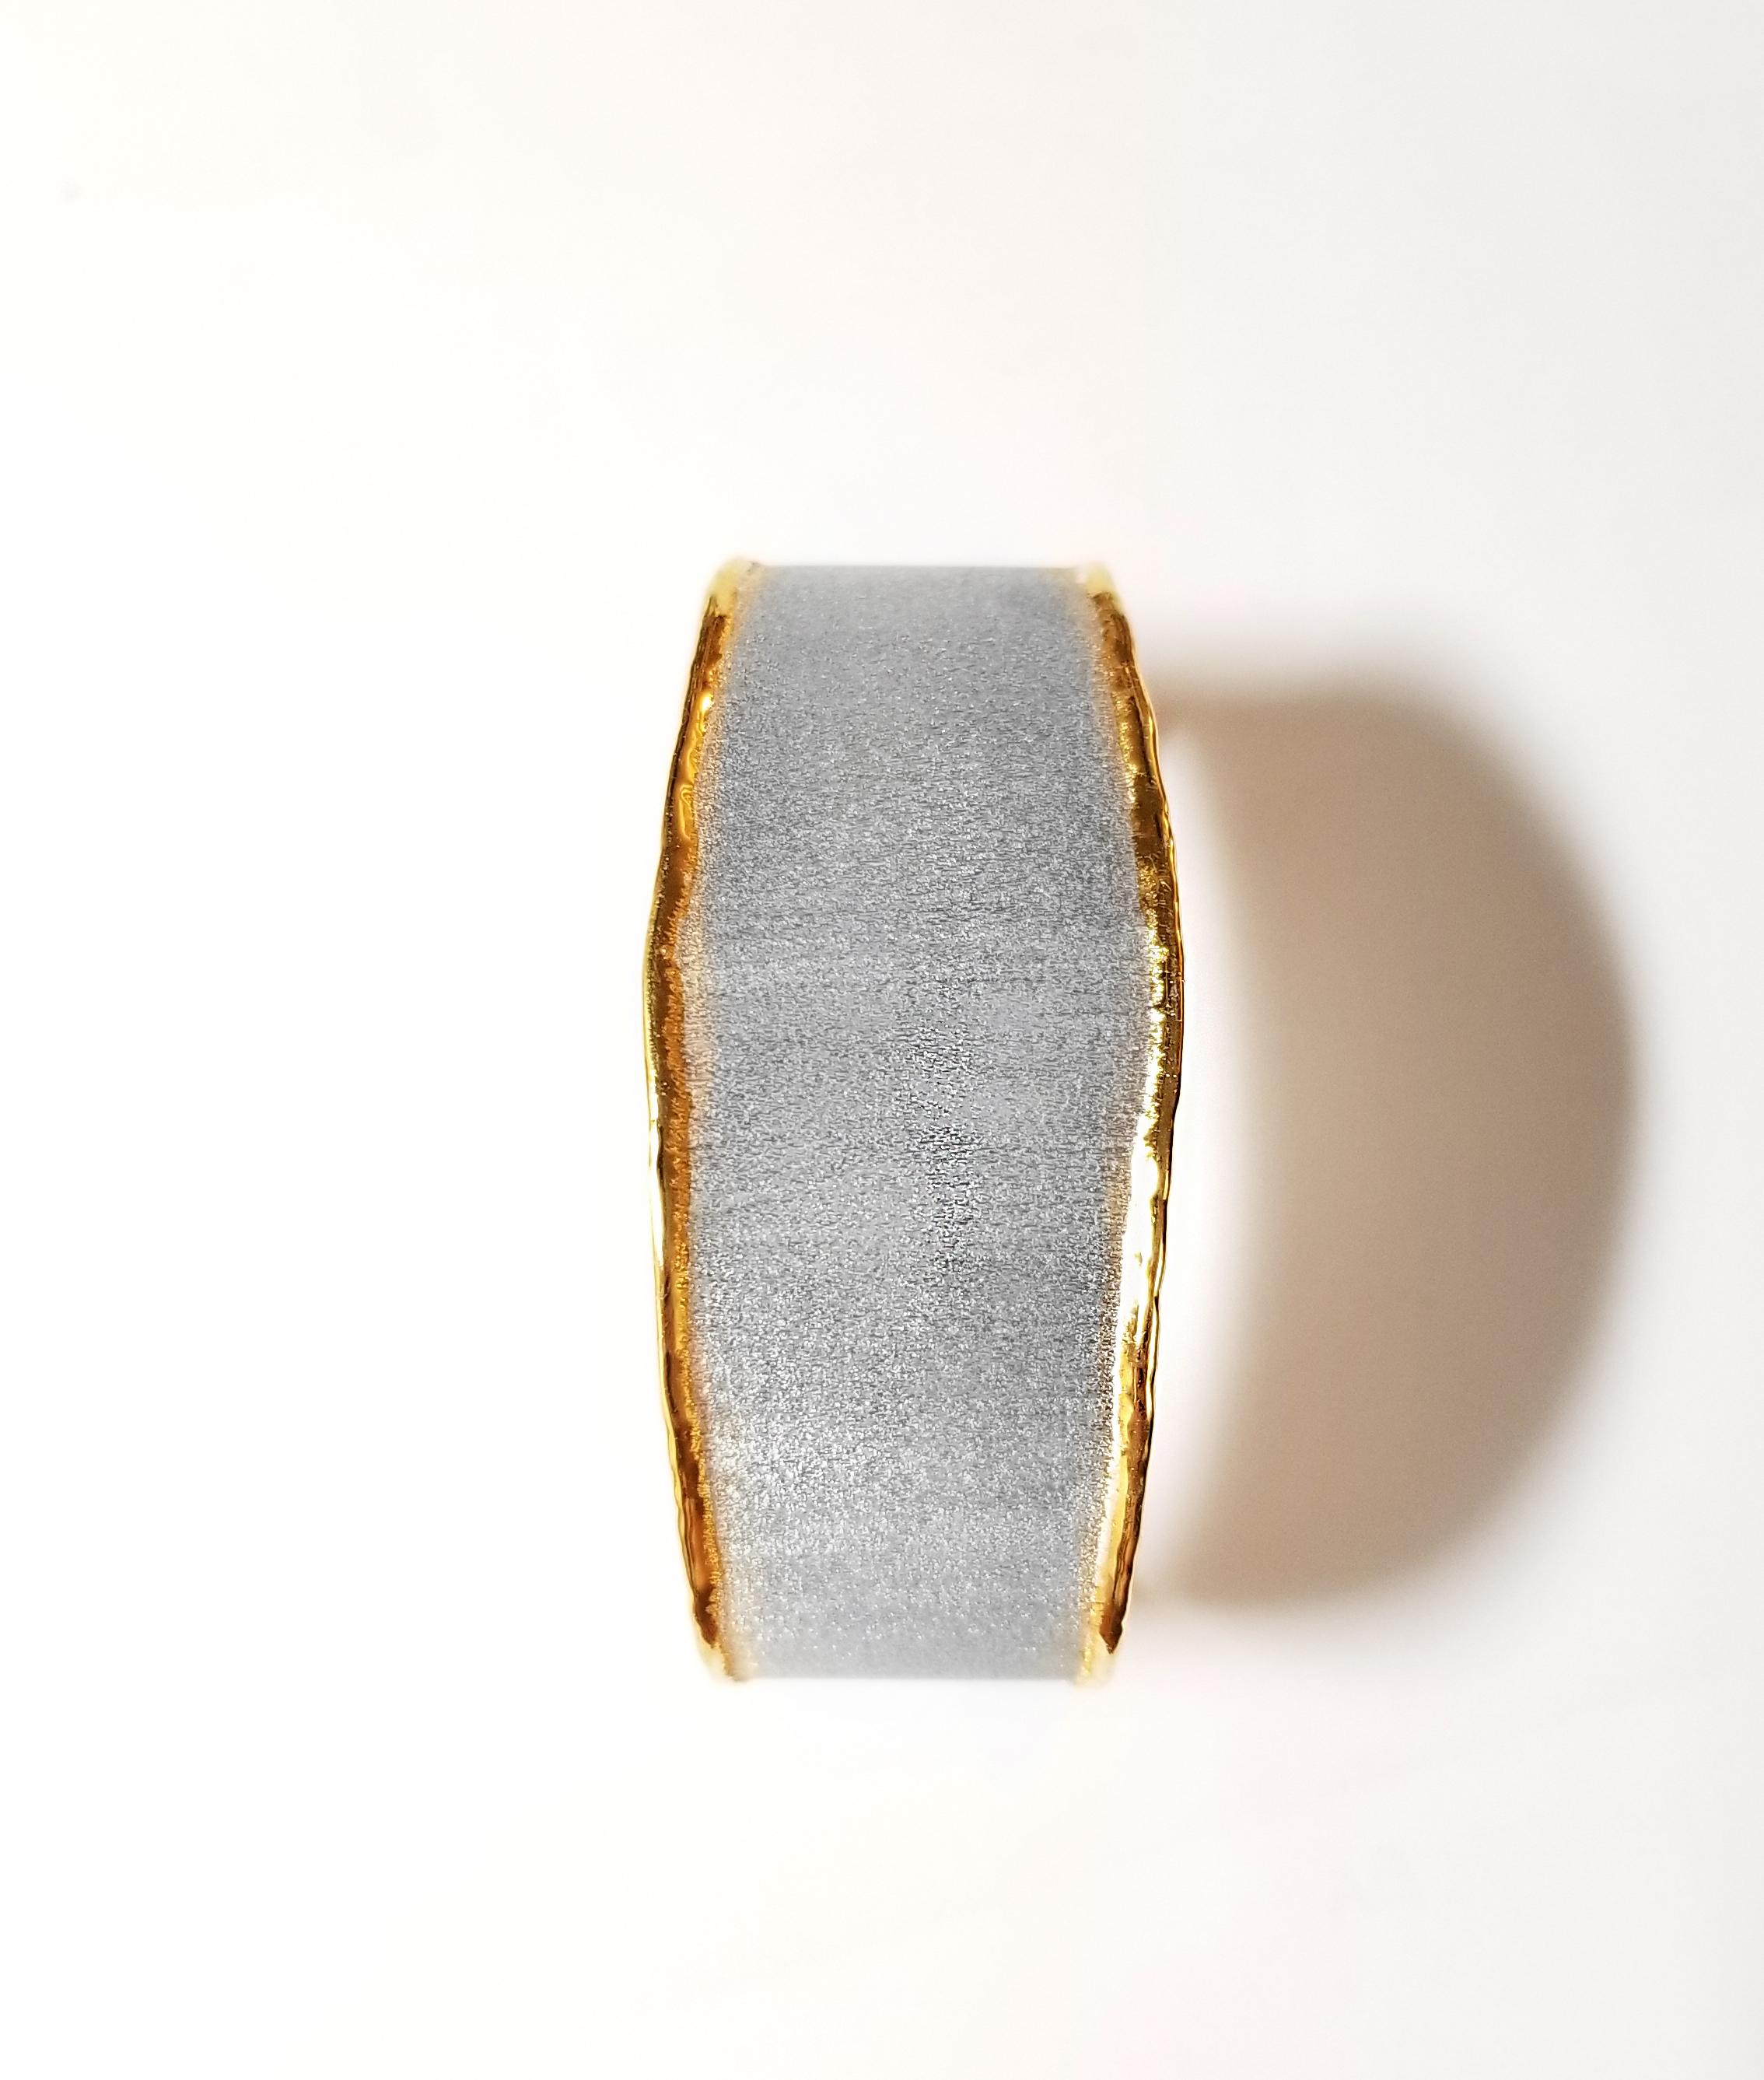 Yianni Creations Midas Collection 100% Handmade Artisan Bangle Bracelet from Fine Silver with a layover of 24 Karat Yellow Gold features unique techniques of craftsmanship - brushed texture and nature-inspired liquid edges. The core of this